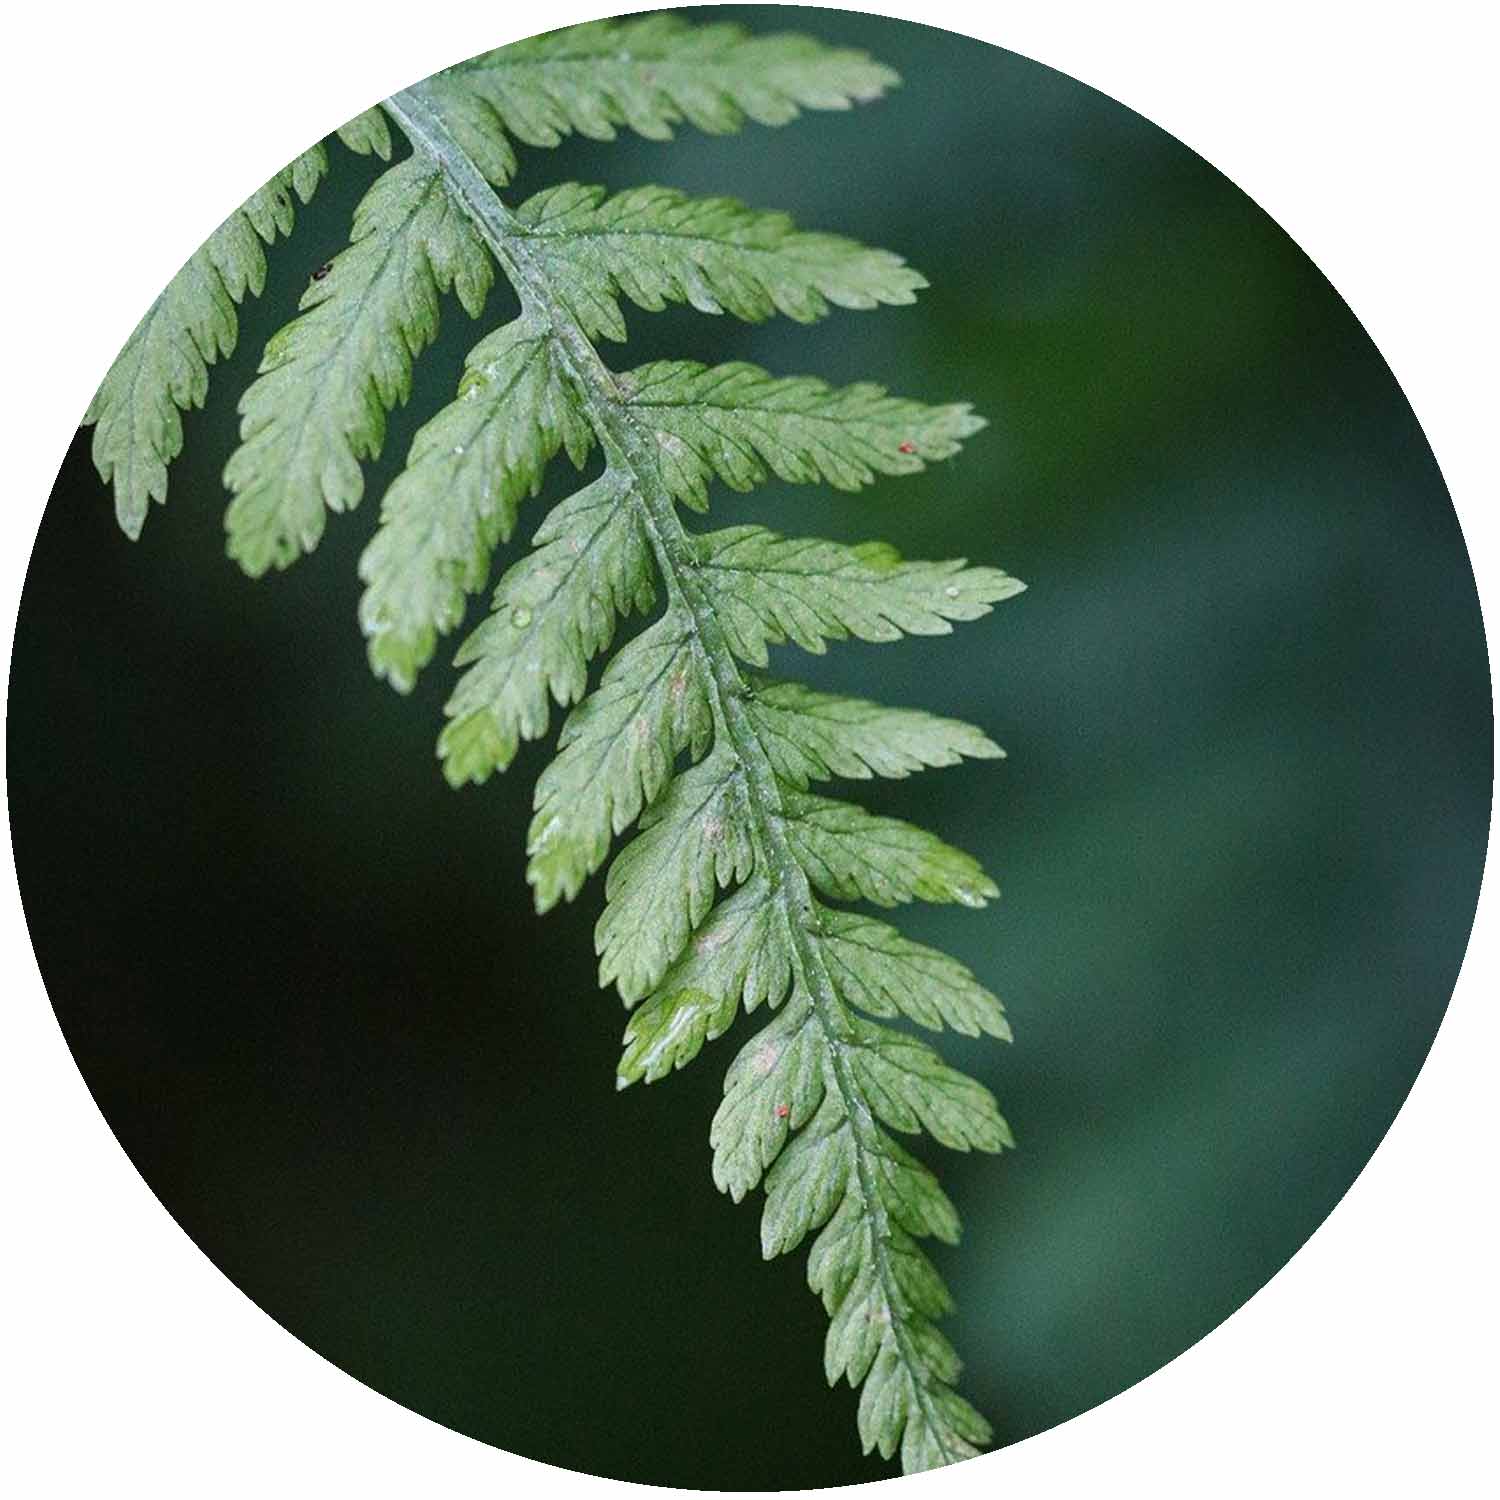 Dryopteris Affinis Cristata The King 1.5ltr